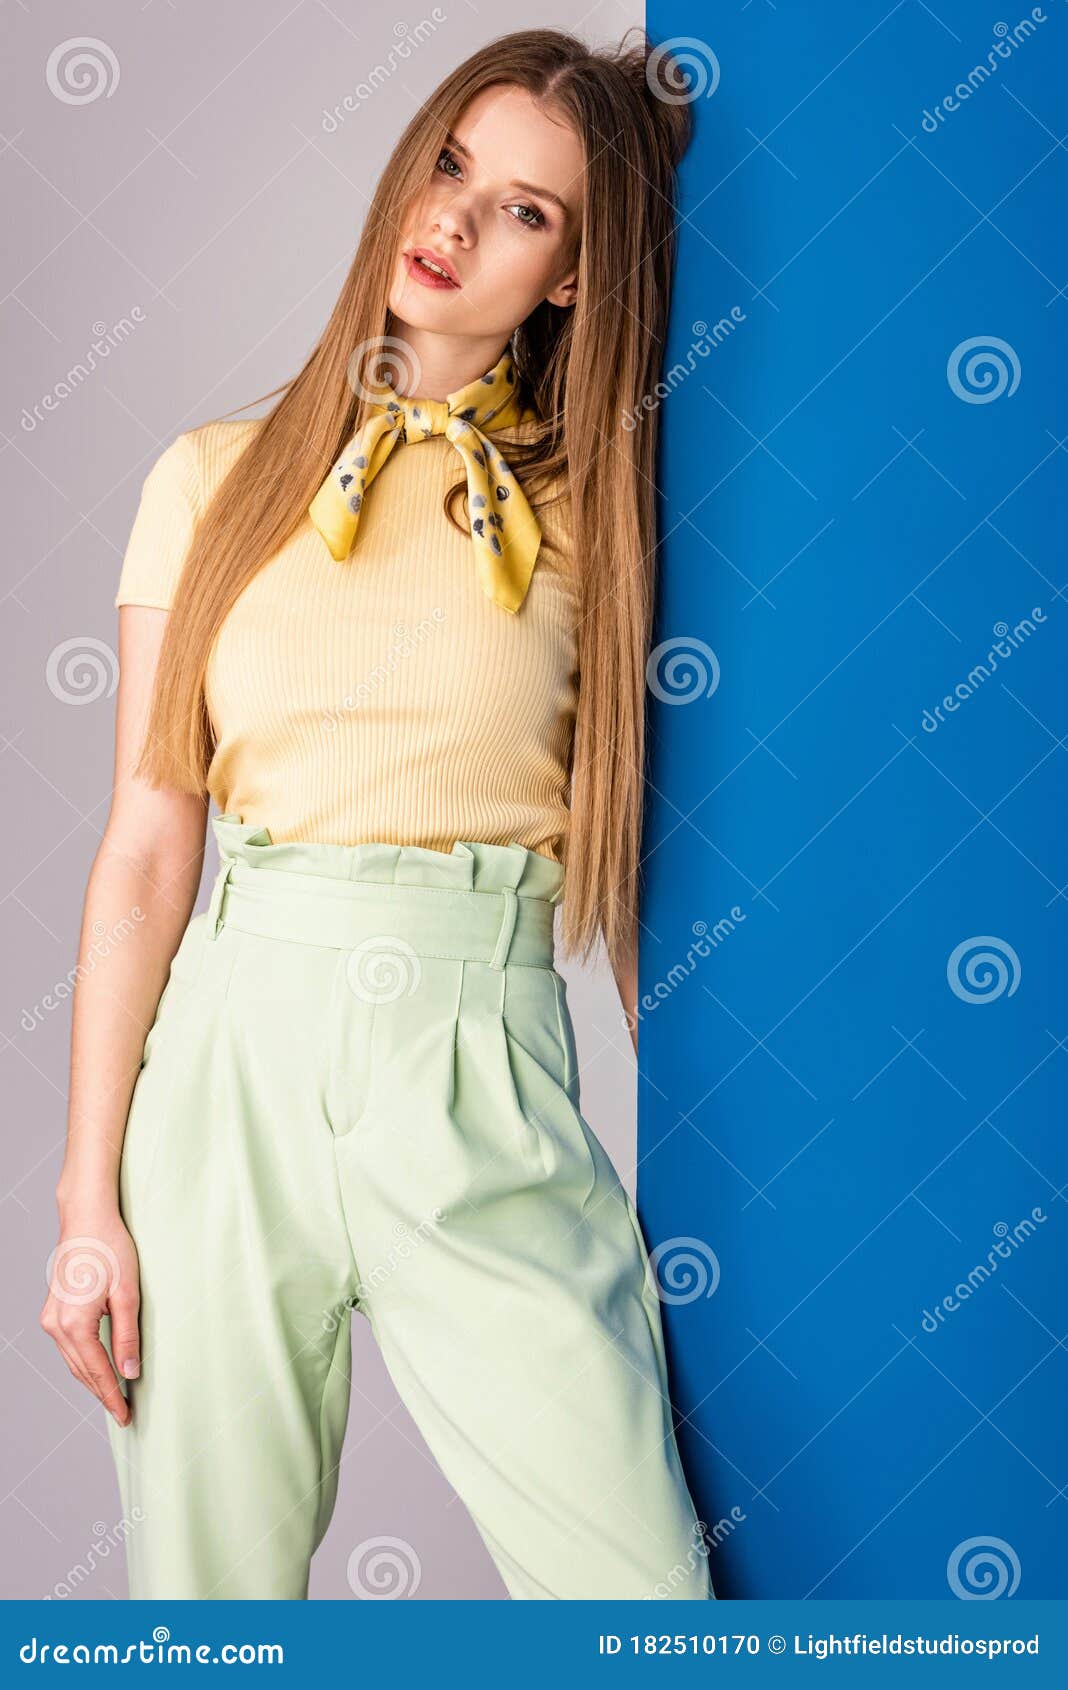 Premium PSD  A boy in a yellow shirt and blue pants